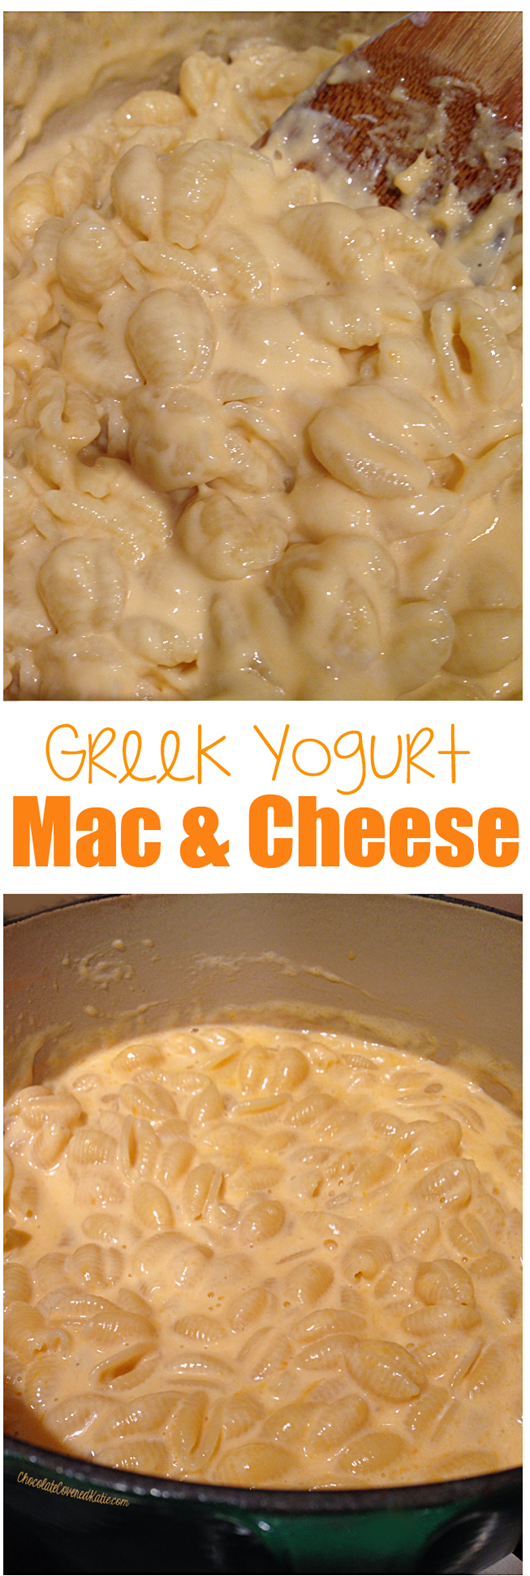 Greek Yogurt Mac And Cheese | Homemade Mac And Cheese | Upgrade From Velveeta And Make A Delicious Holiday Meal